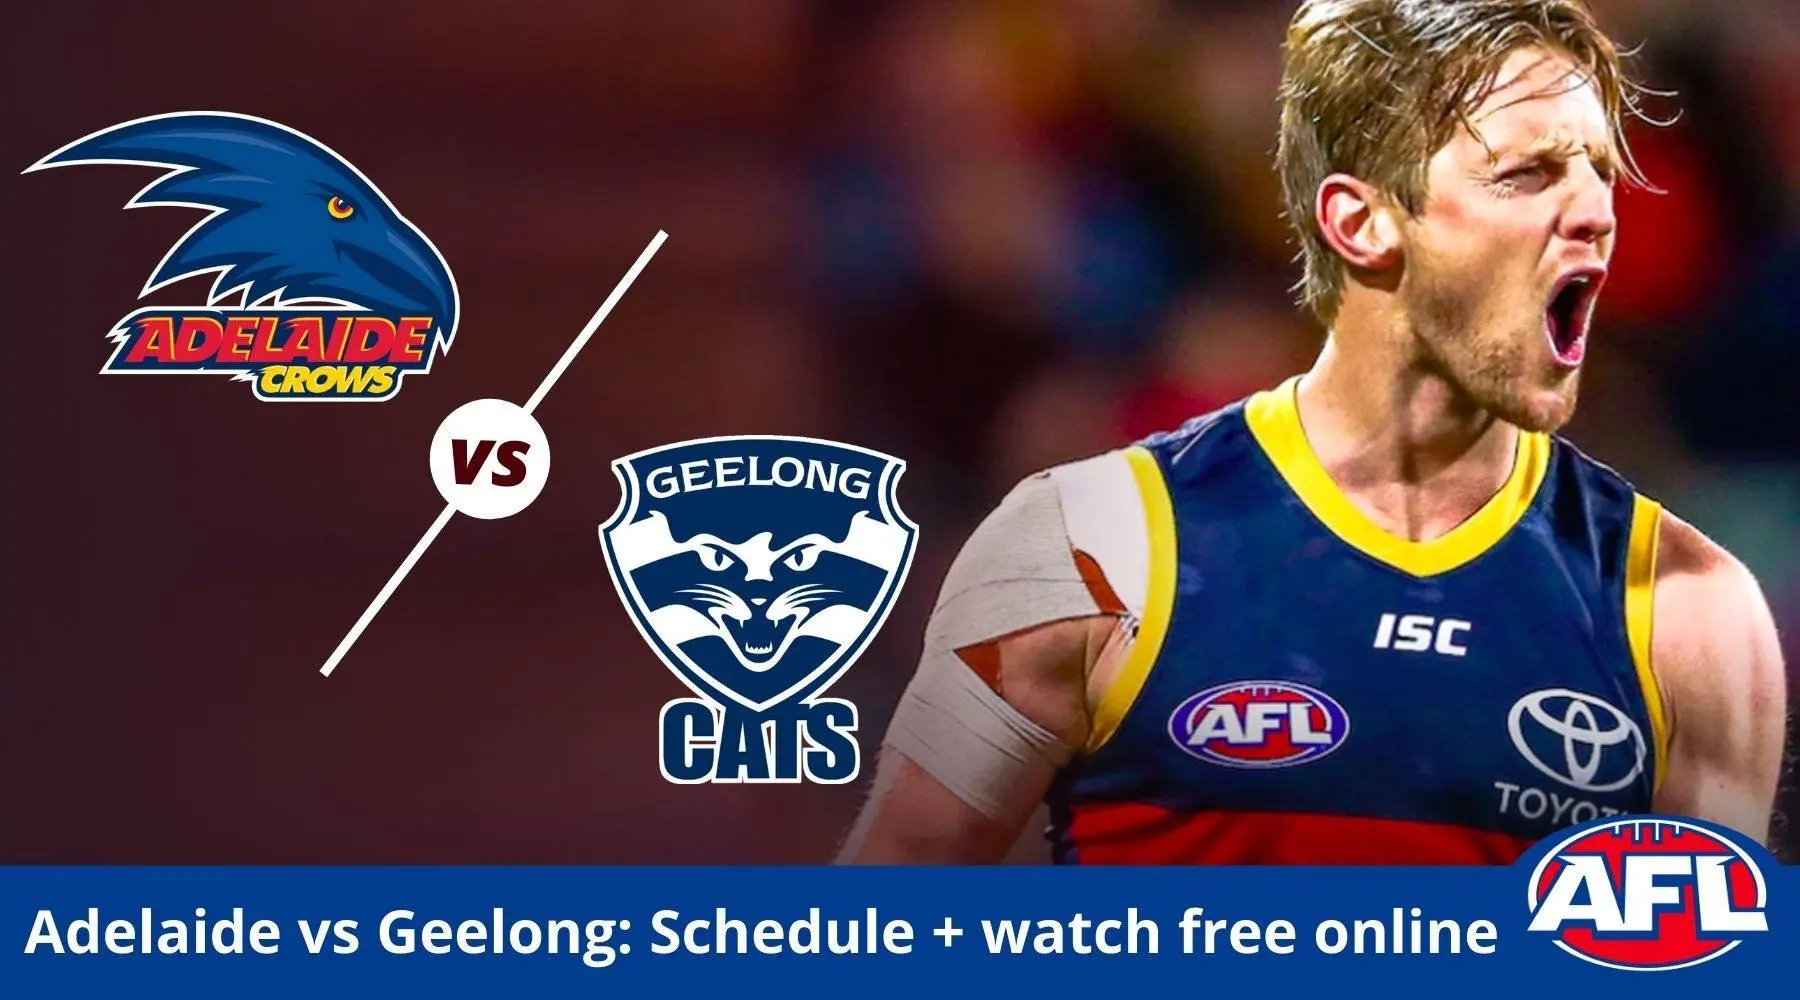 How to watch Adelaide vs Geelong AFL live and free